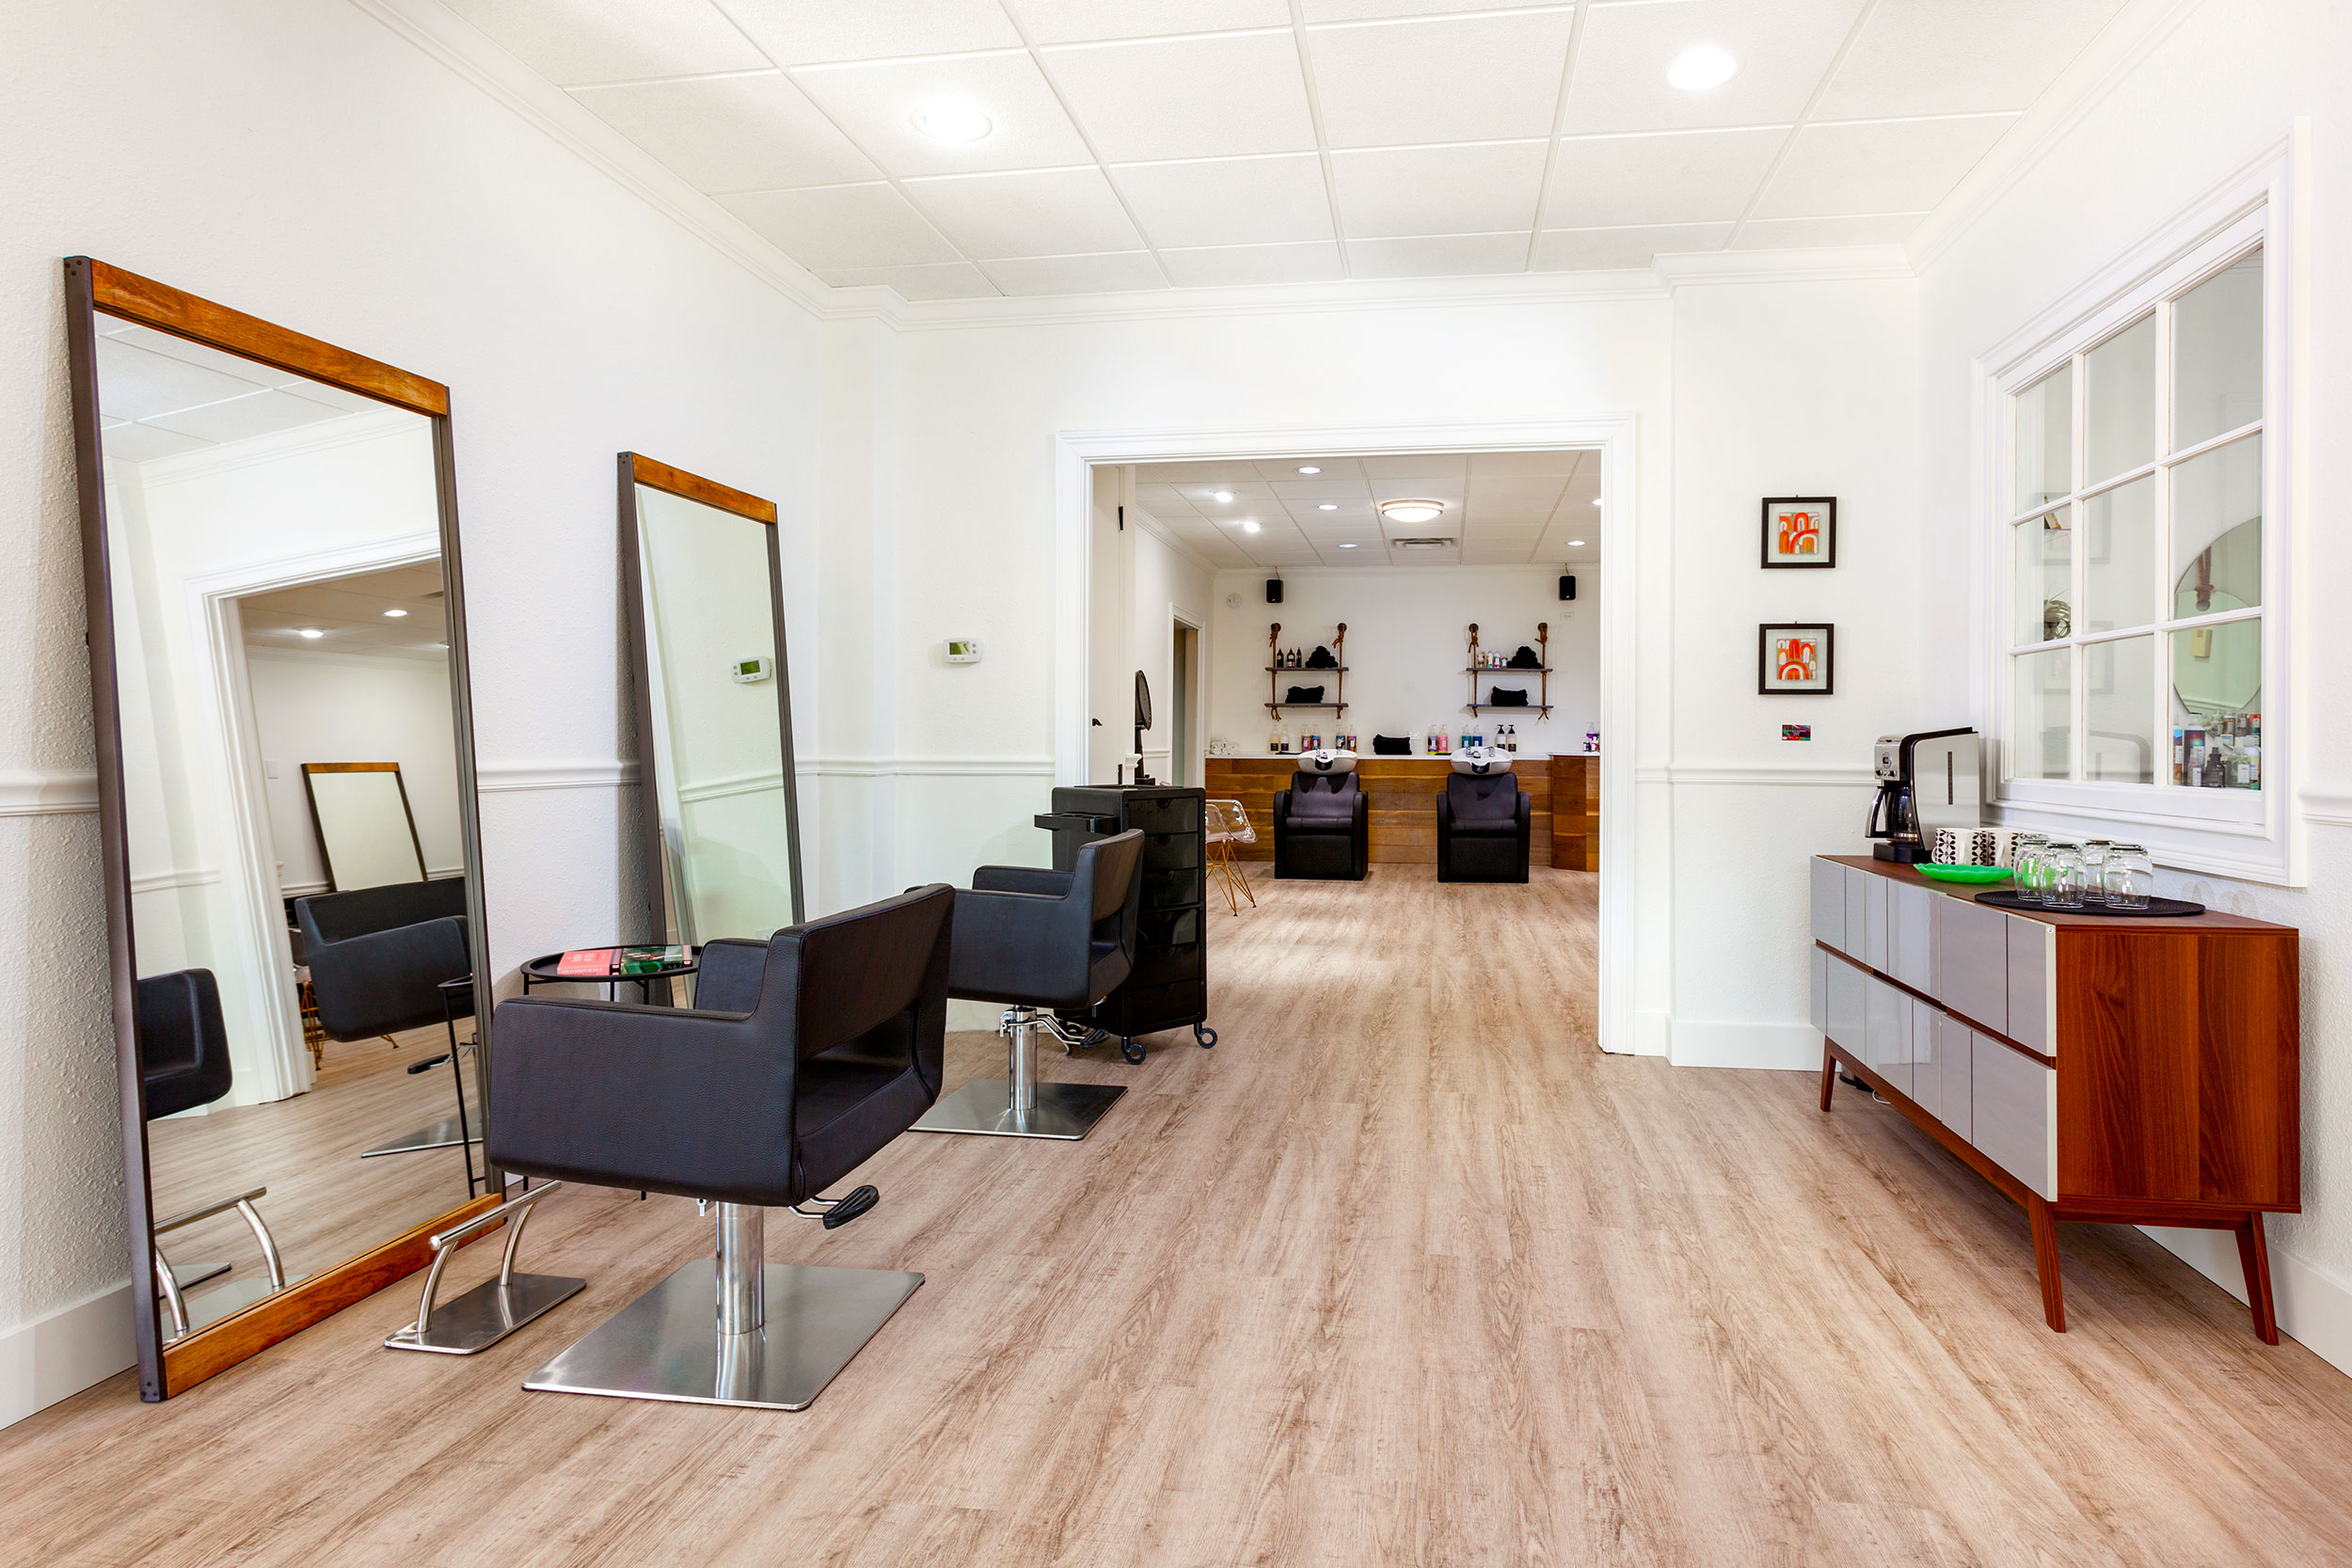 dana beil recommends fox and fawn salon pic